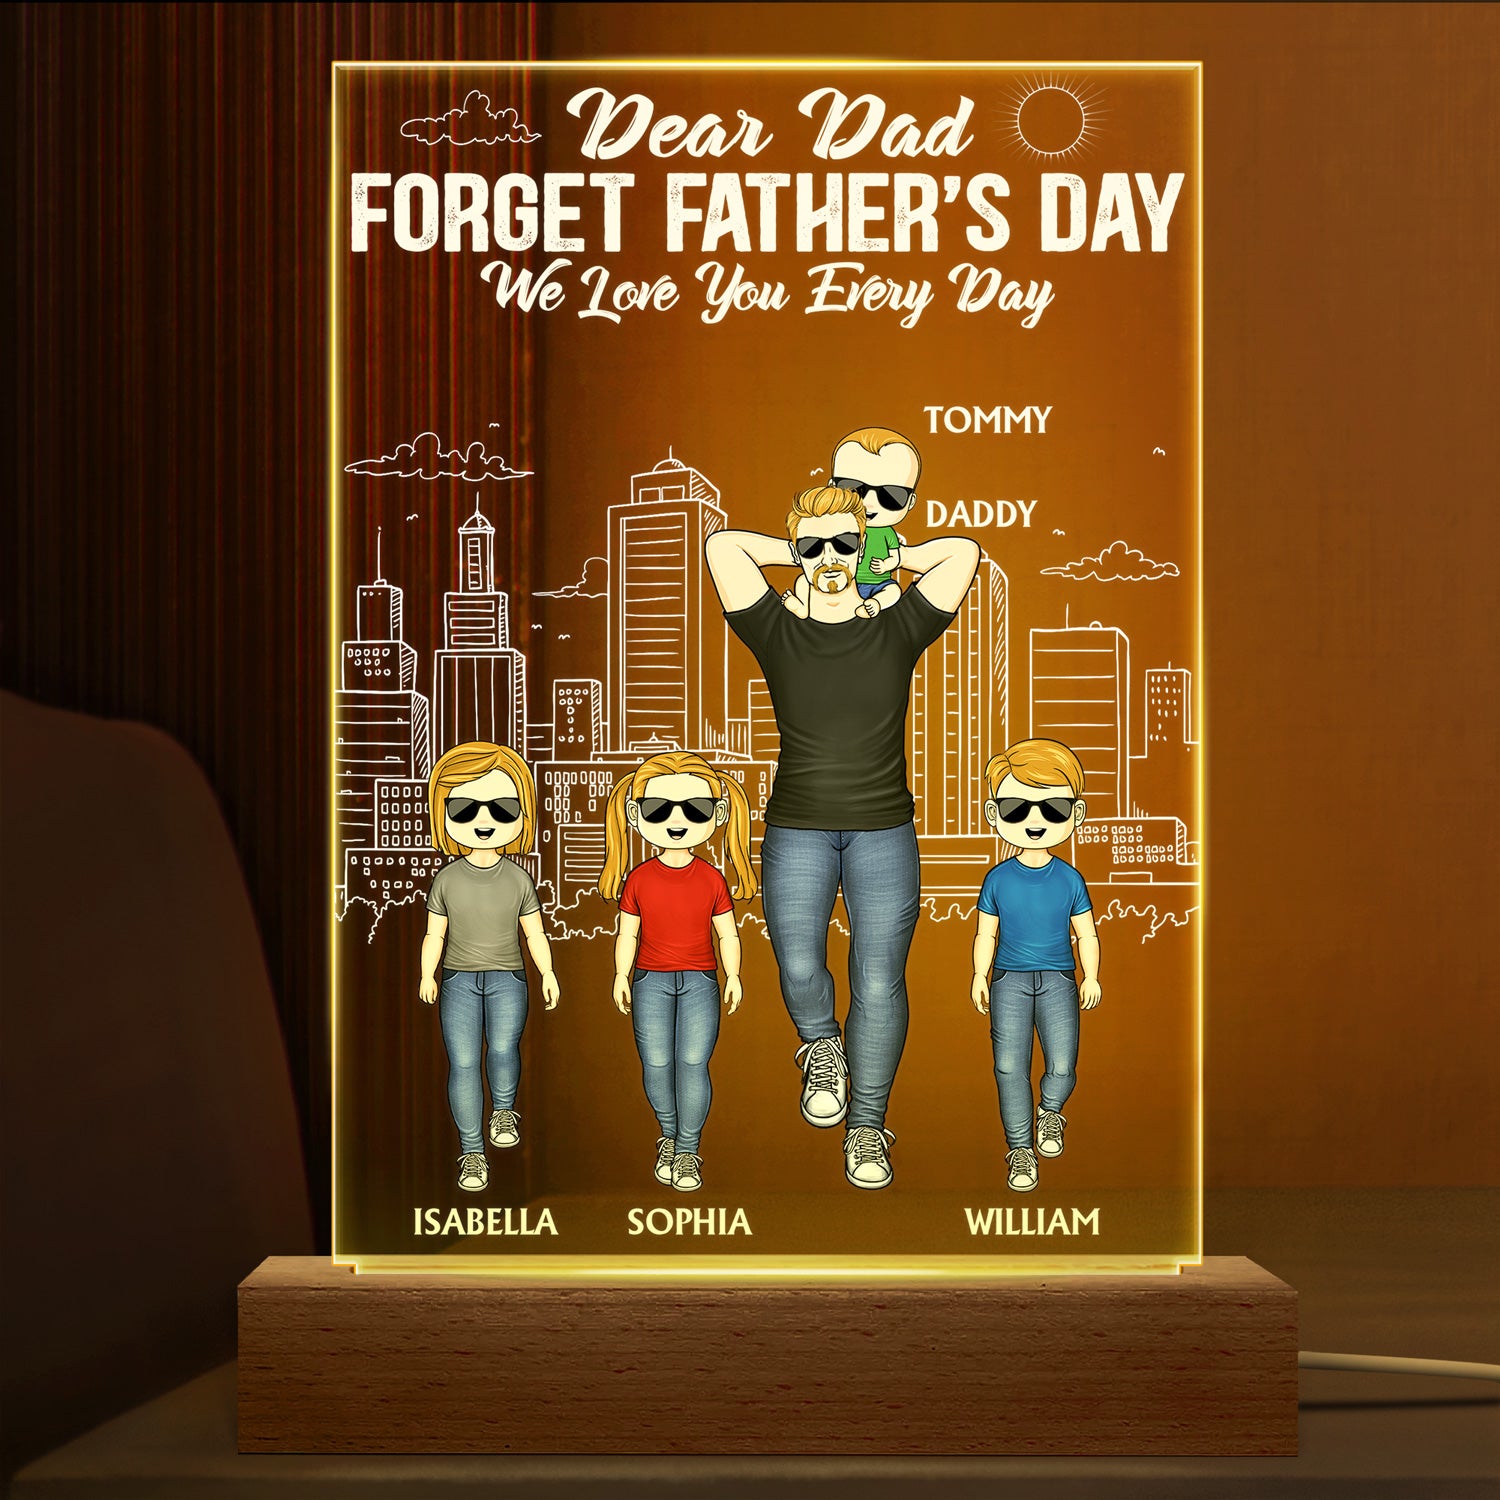 Dad We Love You Every Day - Birthday Gift For Father, Family - Personalized Custom 3D Led Light Wooden Base